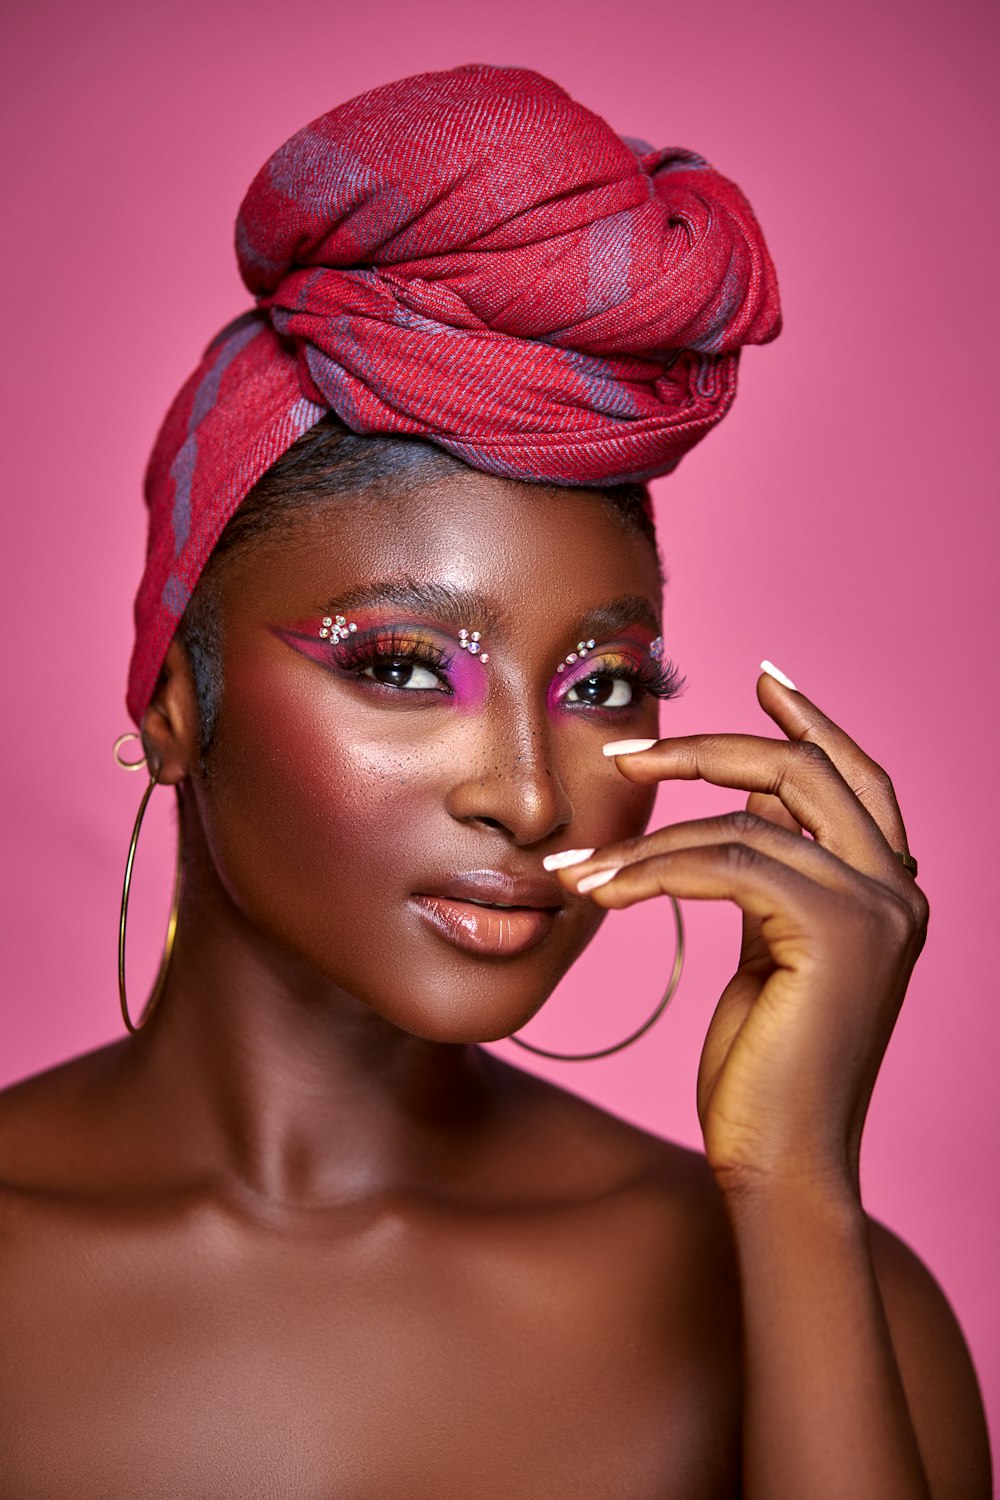 a woman wearing a red turban and pink makeup